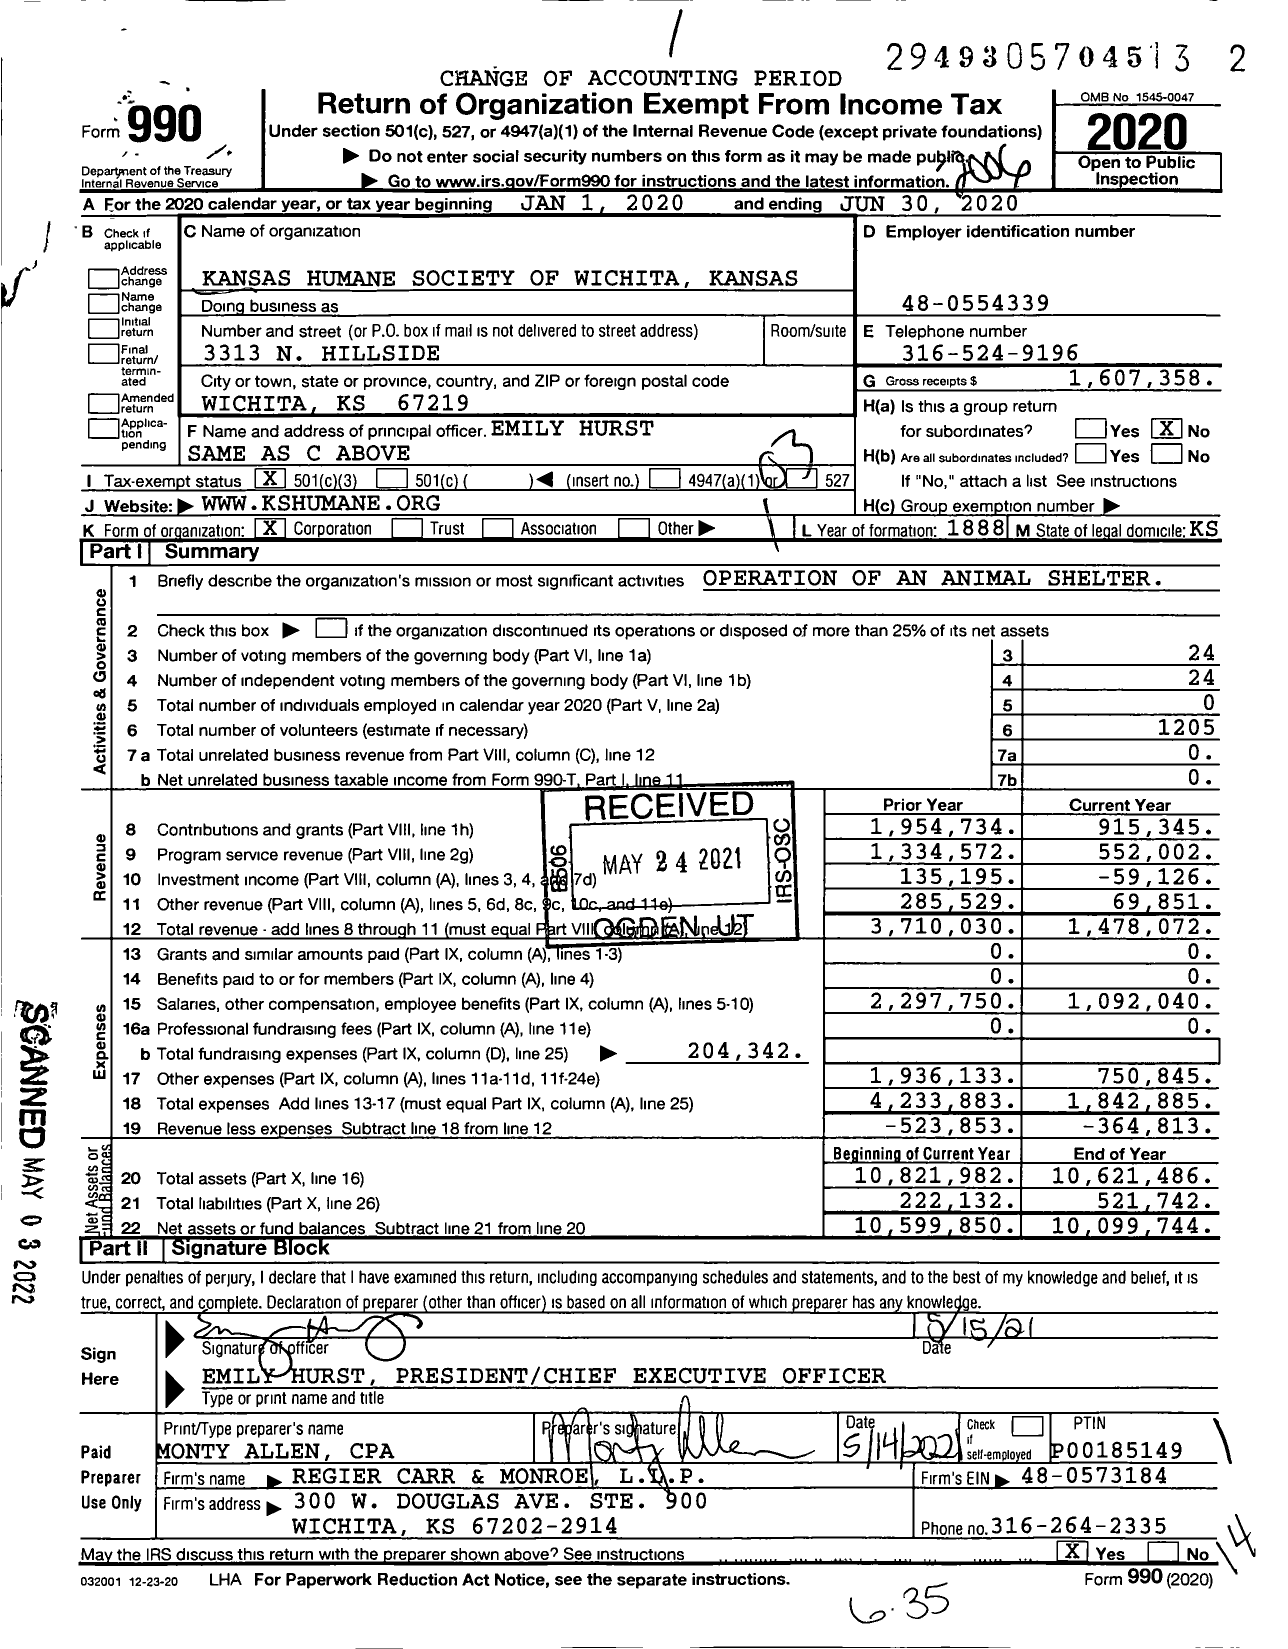 Image of first page of 2019 Form 990 for Kansas Humane Society of Wichita